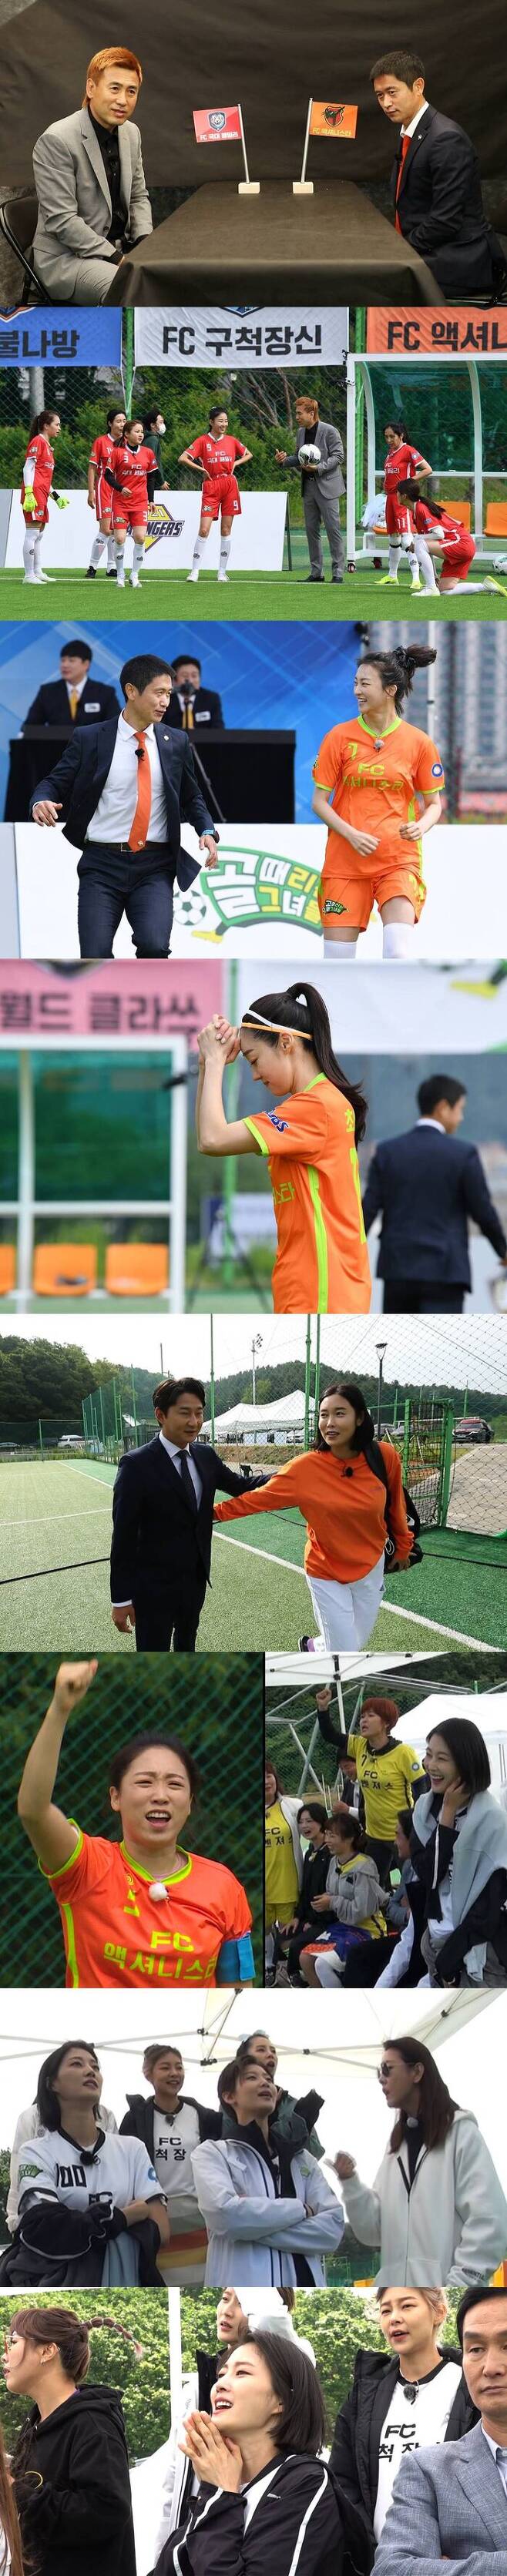 SBS Goal Hits (hereinafter referred to as Goals), which has been Absent for the Tokyo Organizing Committee of the Olympic and the period, will resume broadcasting.In Golgum Women, which will be broadcasted on the 11th, the fierce trilogy is drawn with the last Kyonggi of Group B for the tournament.With the last gyeonggi bay remaining in the UEFA Champions League of FC National Family and FC Achaenista, the FC Guchejang belonging to the same Soest is also expected to have a three-way battle that will make you sweat in your hands because it is decided whether you will be eliminated as a result of this Kyonggi.In the previous filming, the last Kyonggi before the UEFA Champions League was held in the stands.FC Bull Moth Lee Chun-soo has come to cheer for FC National Family, which belongs to his wife Shim Ha-eun.FC Gavengers Cho Hye-ryun gave a fight to the college junior FC Acgenista Mido.Especially, in this Kyonggi, FC Gucheokjang, which can advance to the tournament only if FC National University Family wins, watched the fierce battle of the two teams with more desire than anyone else.The team manager, who gathered to listen to the strategy of the former team, Kyonggi, was more nervous than ever.Kim Byeong-ji, director of the FC National University Family, said, Nam Hyun-hee will play as a field player, but if he goes to the penalty shoot-out, he will leave the goalkeeper position.On the other hand, Lee Young-pyo, director of FC Acgenista, also said, If Choi is shooting properly, it will be very powerful.With the final result of the unexplained triad, the glory of the final entry into the Group B tournament will be revealed to the team, and the result of the guillotine match will be released at Golden Woman which will be broadcasted at 9 pm on Wednesday 11th.